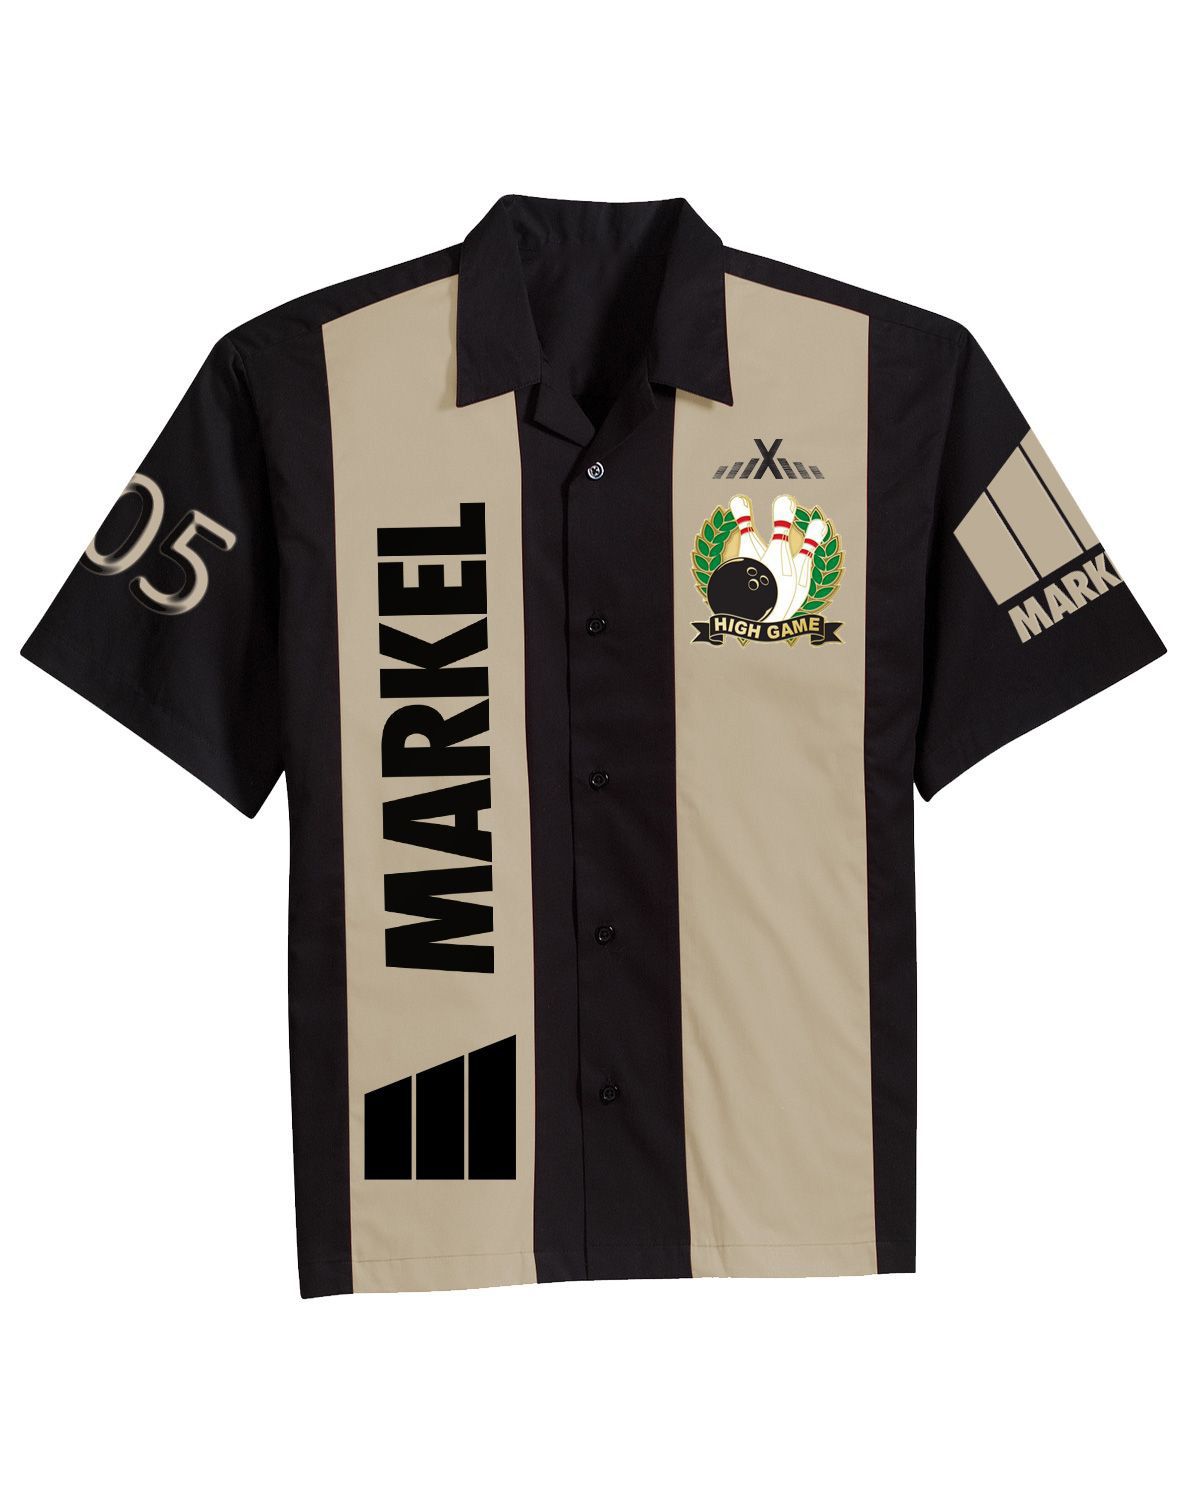 Interpersonal Insulator alley Full Custom Sublimated Bowling shirt for Men | AthleisureX